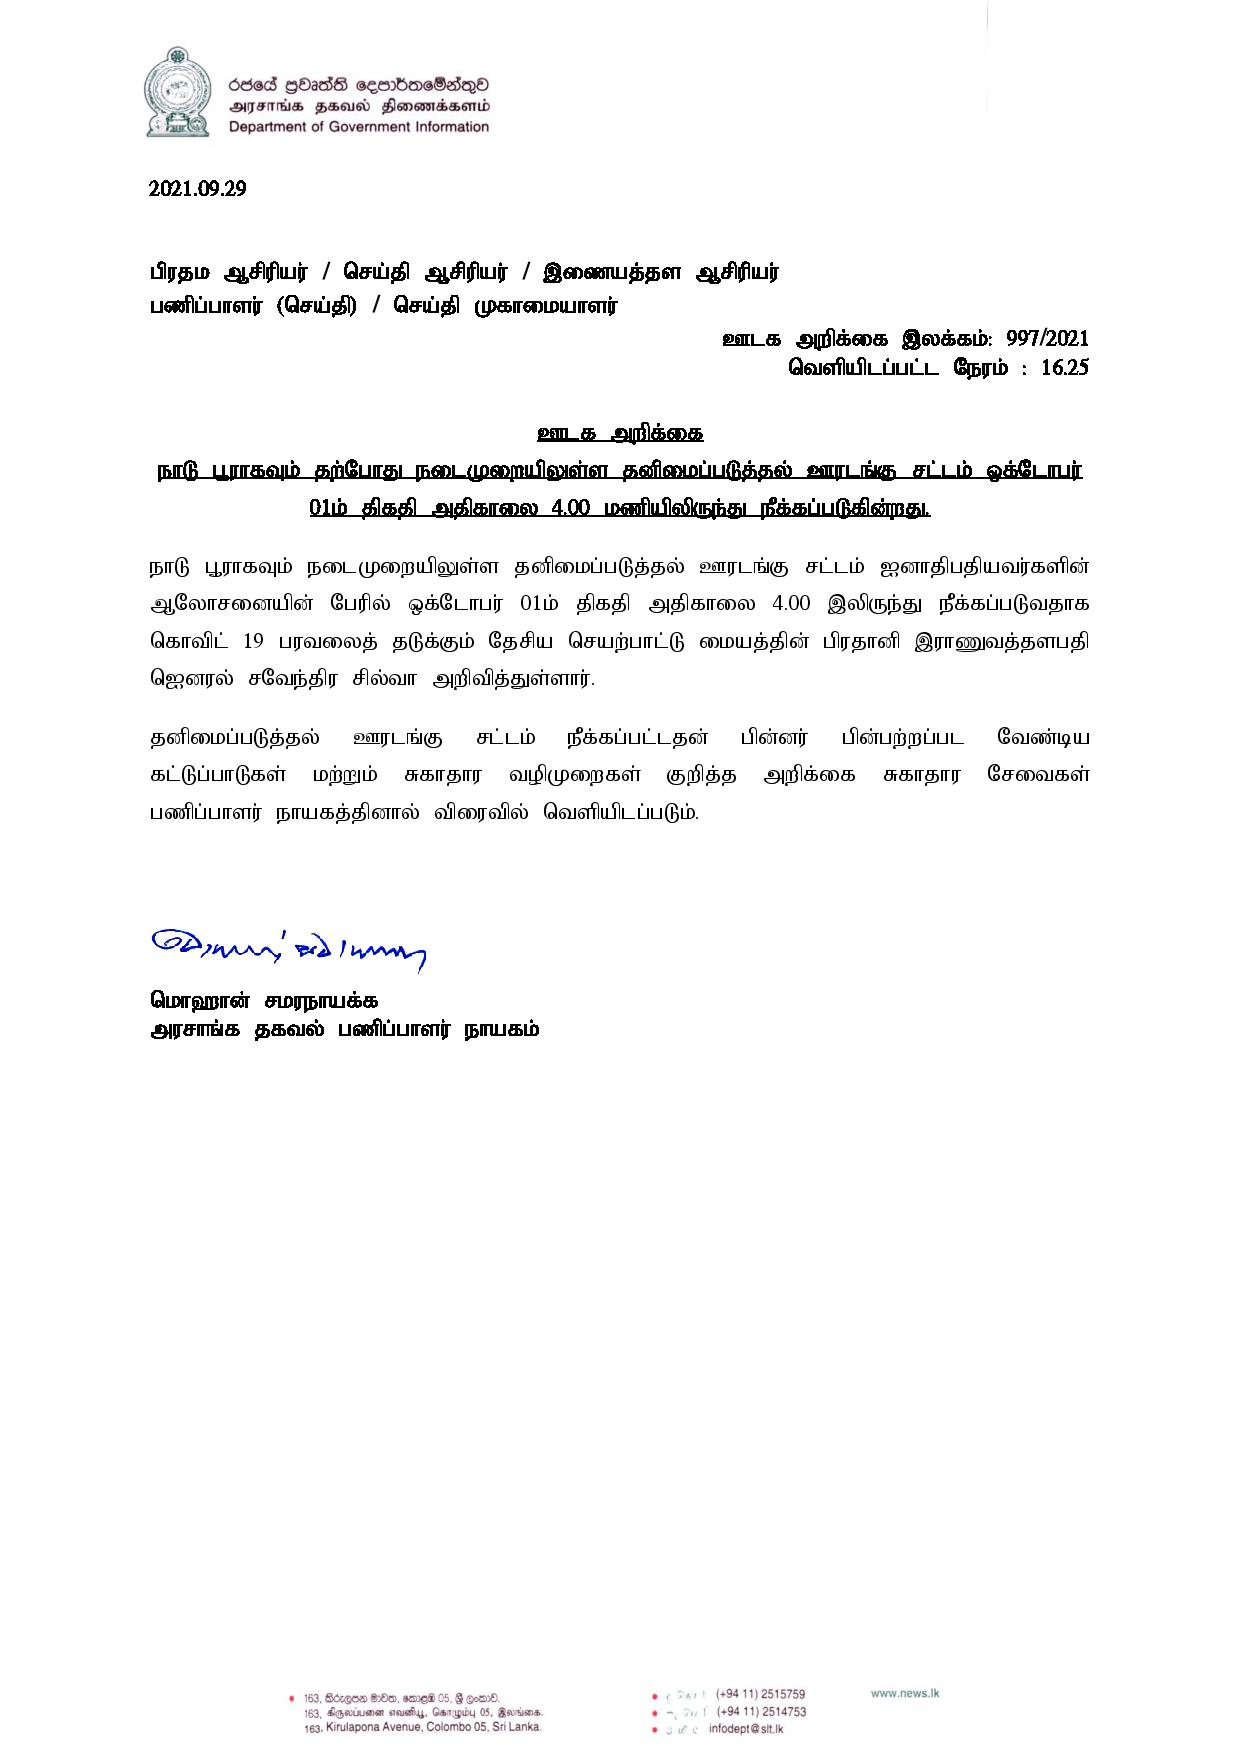 Press Release 997 Tamil page 001